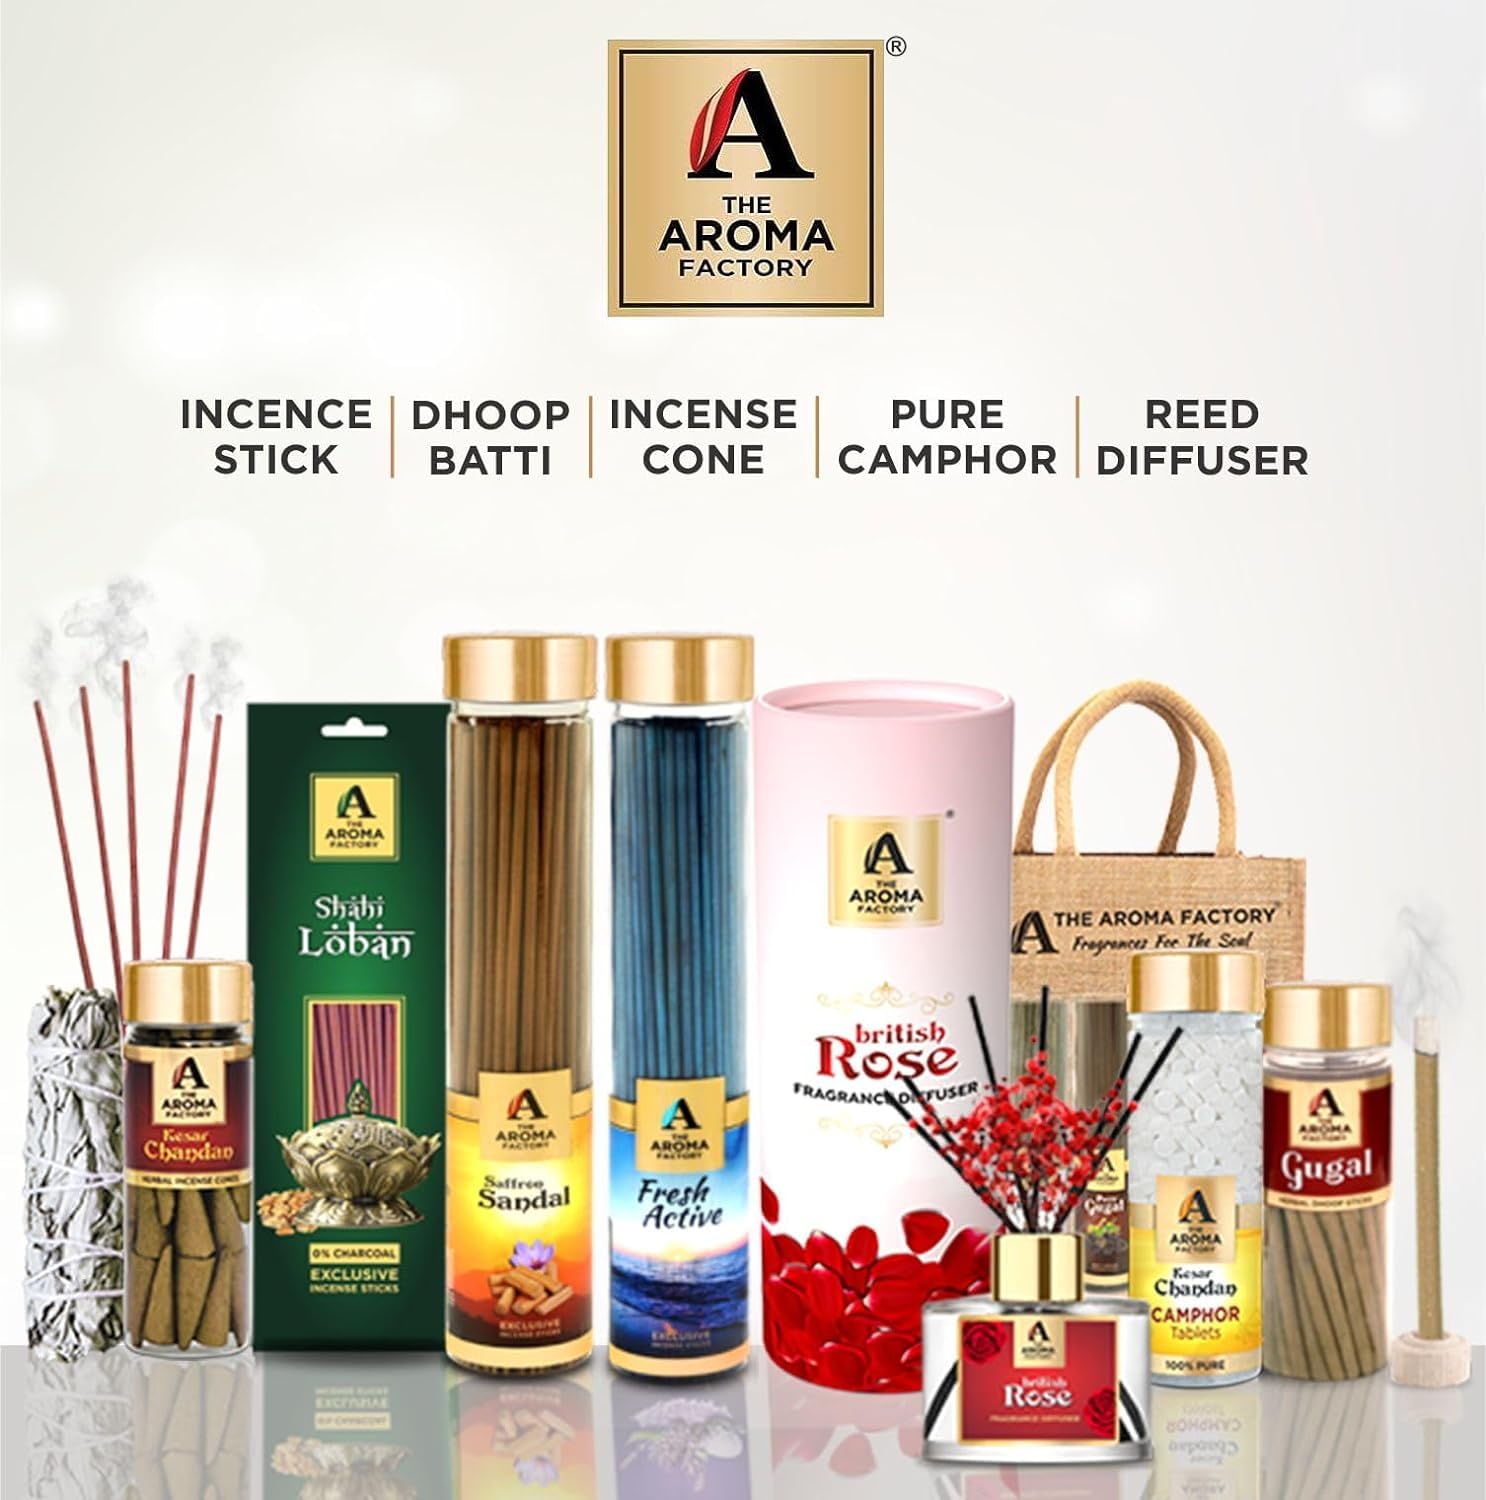 The Aroma Factory Happy Birthday Bhabhi Gift with Card (25 Swad Candy, Lavender Agarbatti Bottle, Fresh Active Cone) in Jute Bag